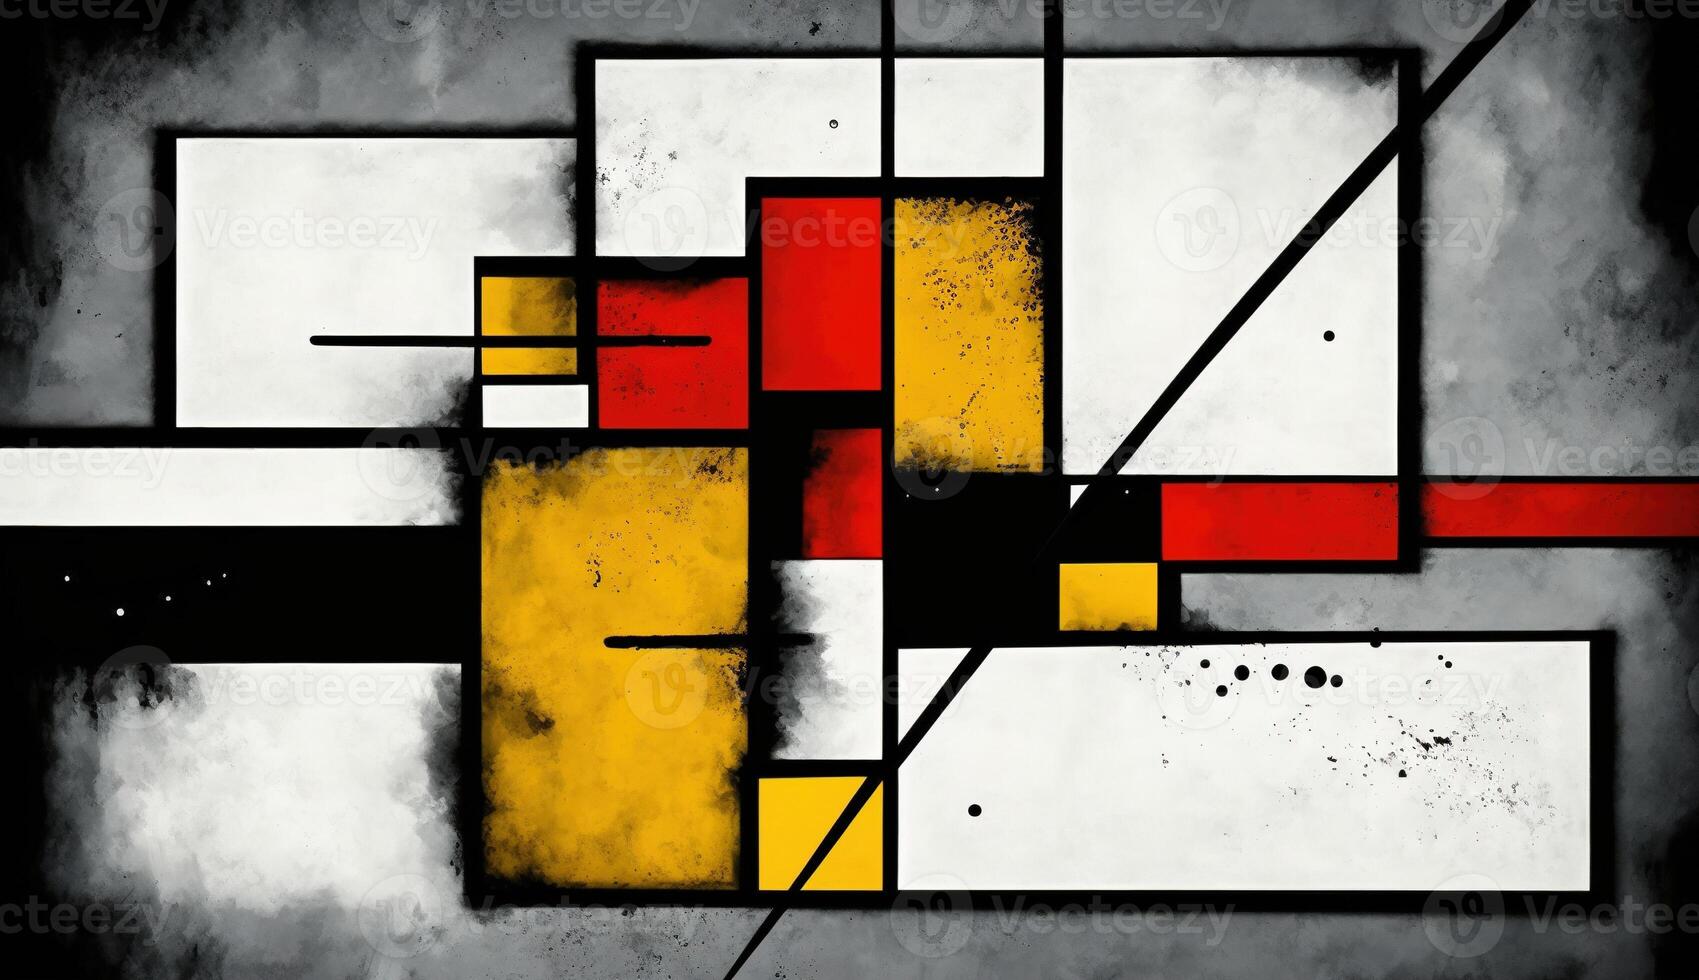 , cubist painted abstract colorful rectangles in mondrian style background. Trendy geometric design. photo